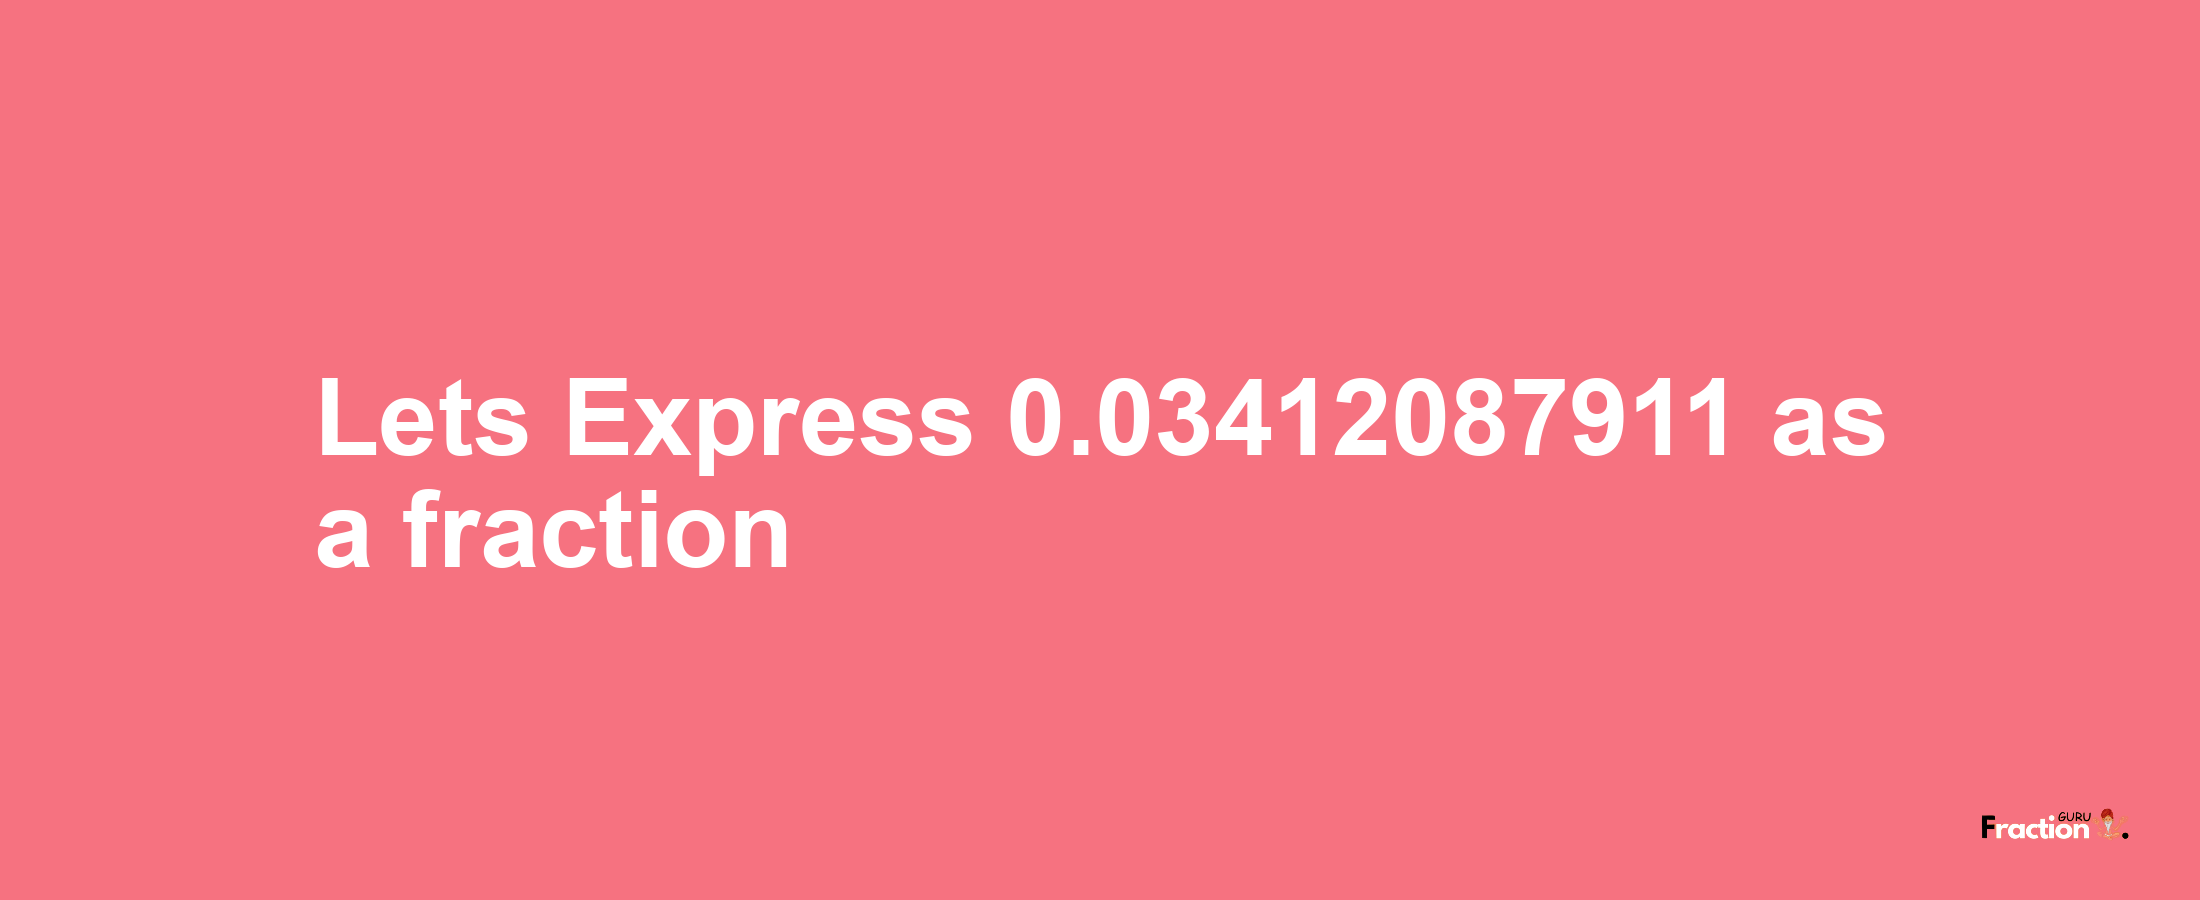 Lets Express 0.03412087911 as afraction